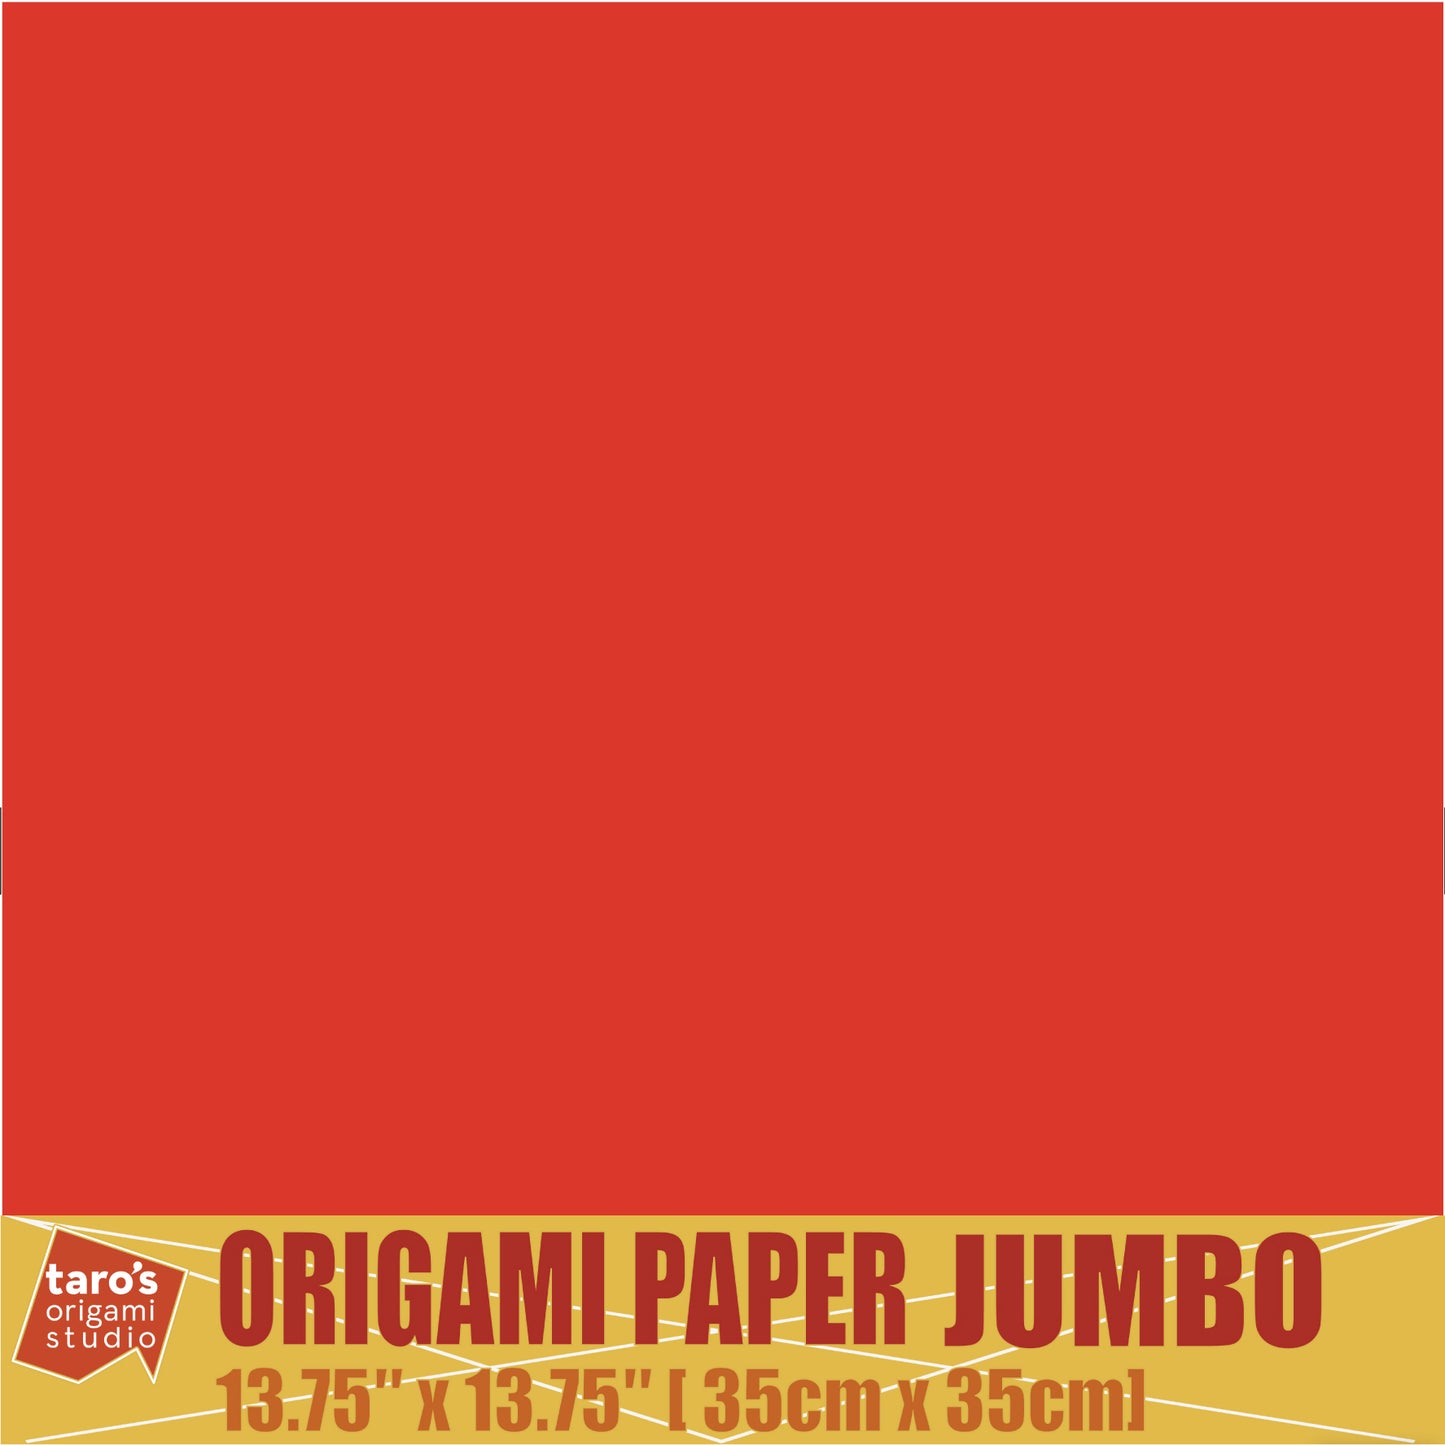 [Taro's Origami Studio] TANT Jumbo 13.75 Inch (35 cm) Double Sided Single Color (Red) 20 Sheets (All Same Color) for Beginner to Expert (Made in Japan)